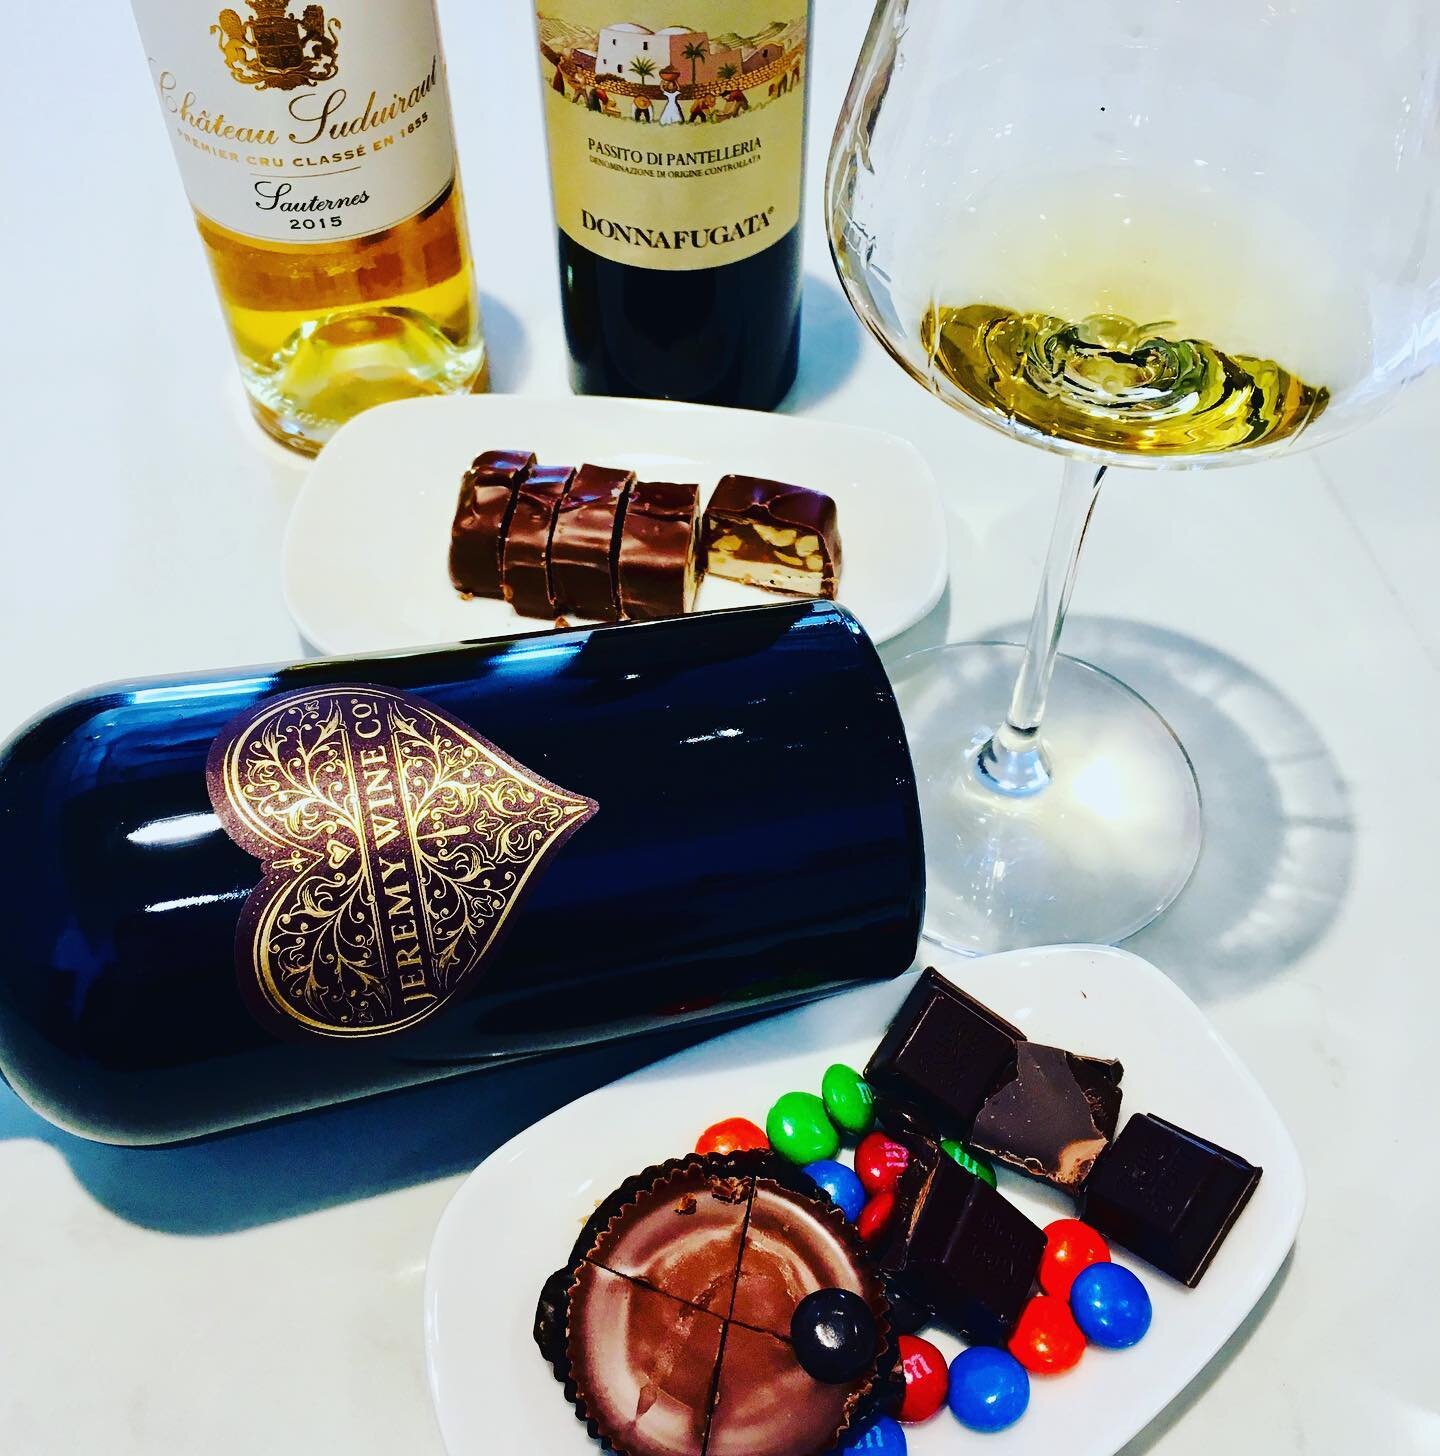 Happy Halloween everyone. I&rsquo;m not always a fan of Halloween candy and wine together but it can be fun trying to figure out what brightly colored sugary treat pairs well with wine. Some of the most thought out and intriguing Halloween candy pair